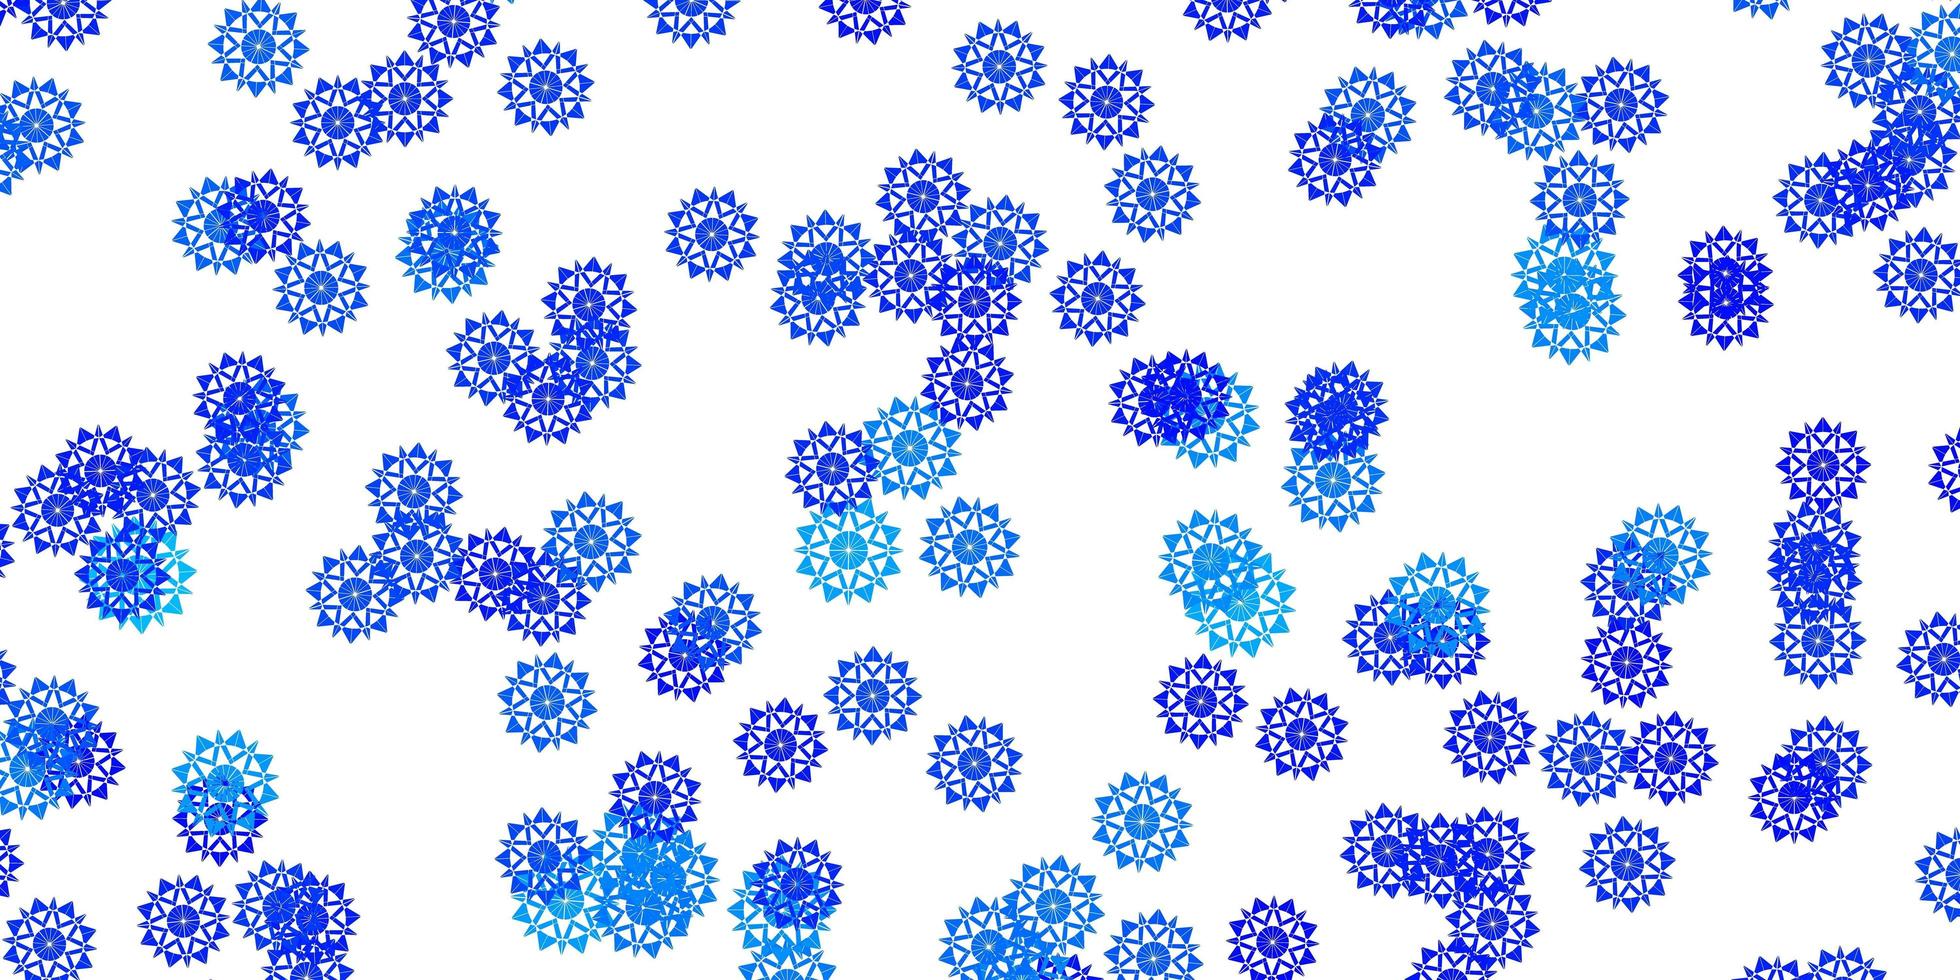 Light BLUE vector texture with bright snowflakes.